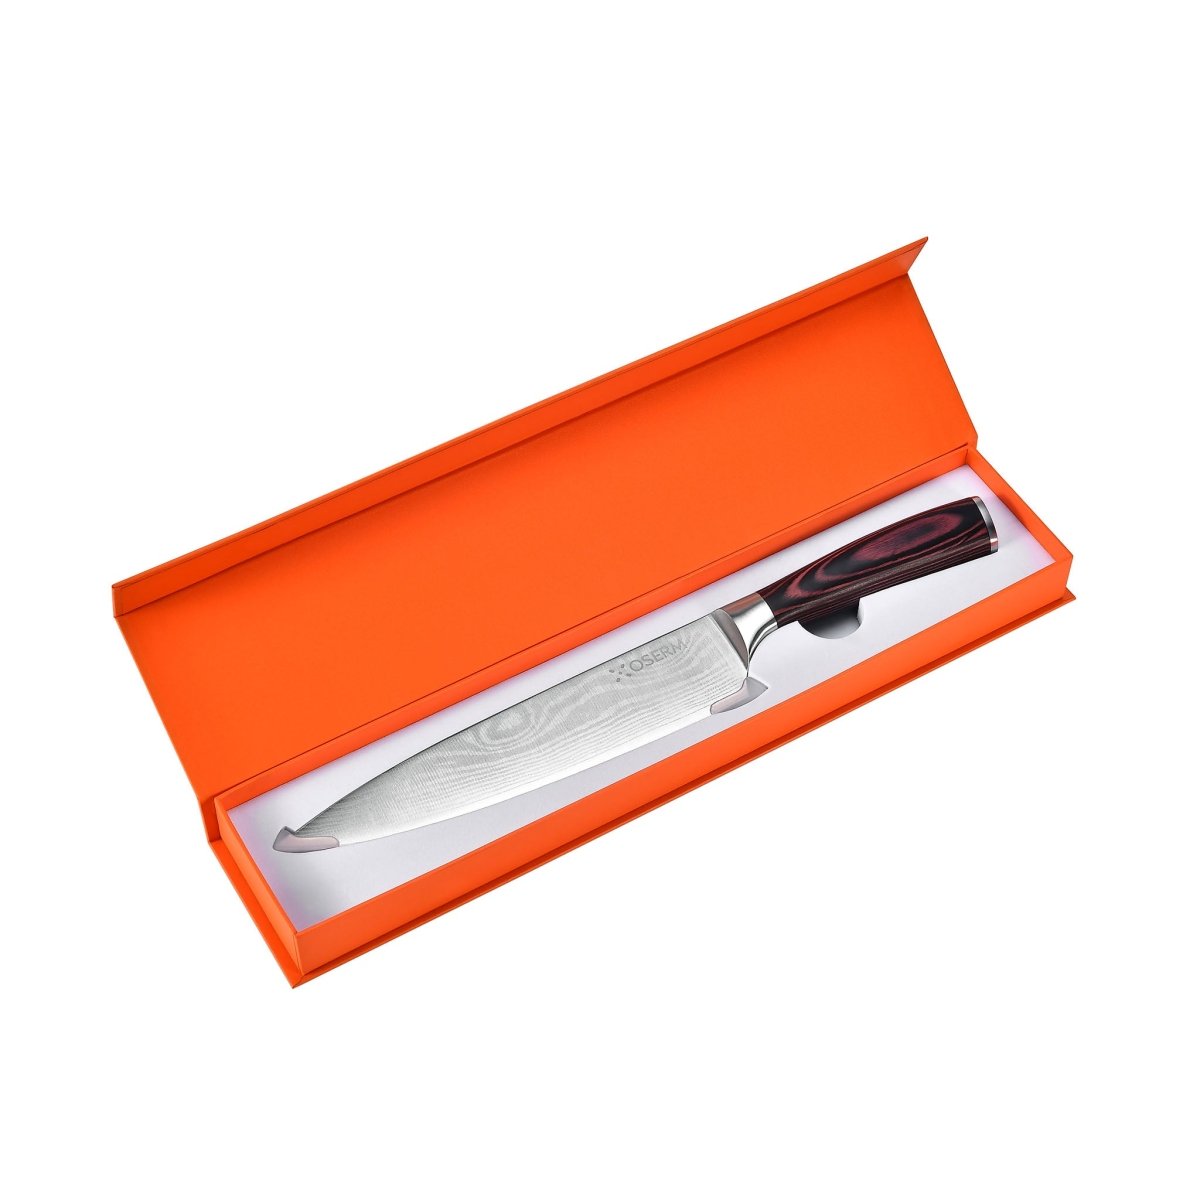 OSERM 8'' Japanese Chef Knife: Ultra-Sharp High Carbon Stainless Steel with Pakkawood Handle & Beautiful Gift Box